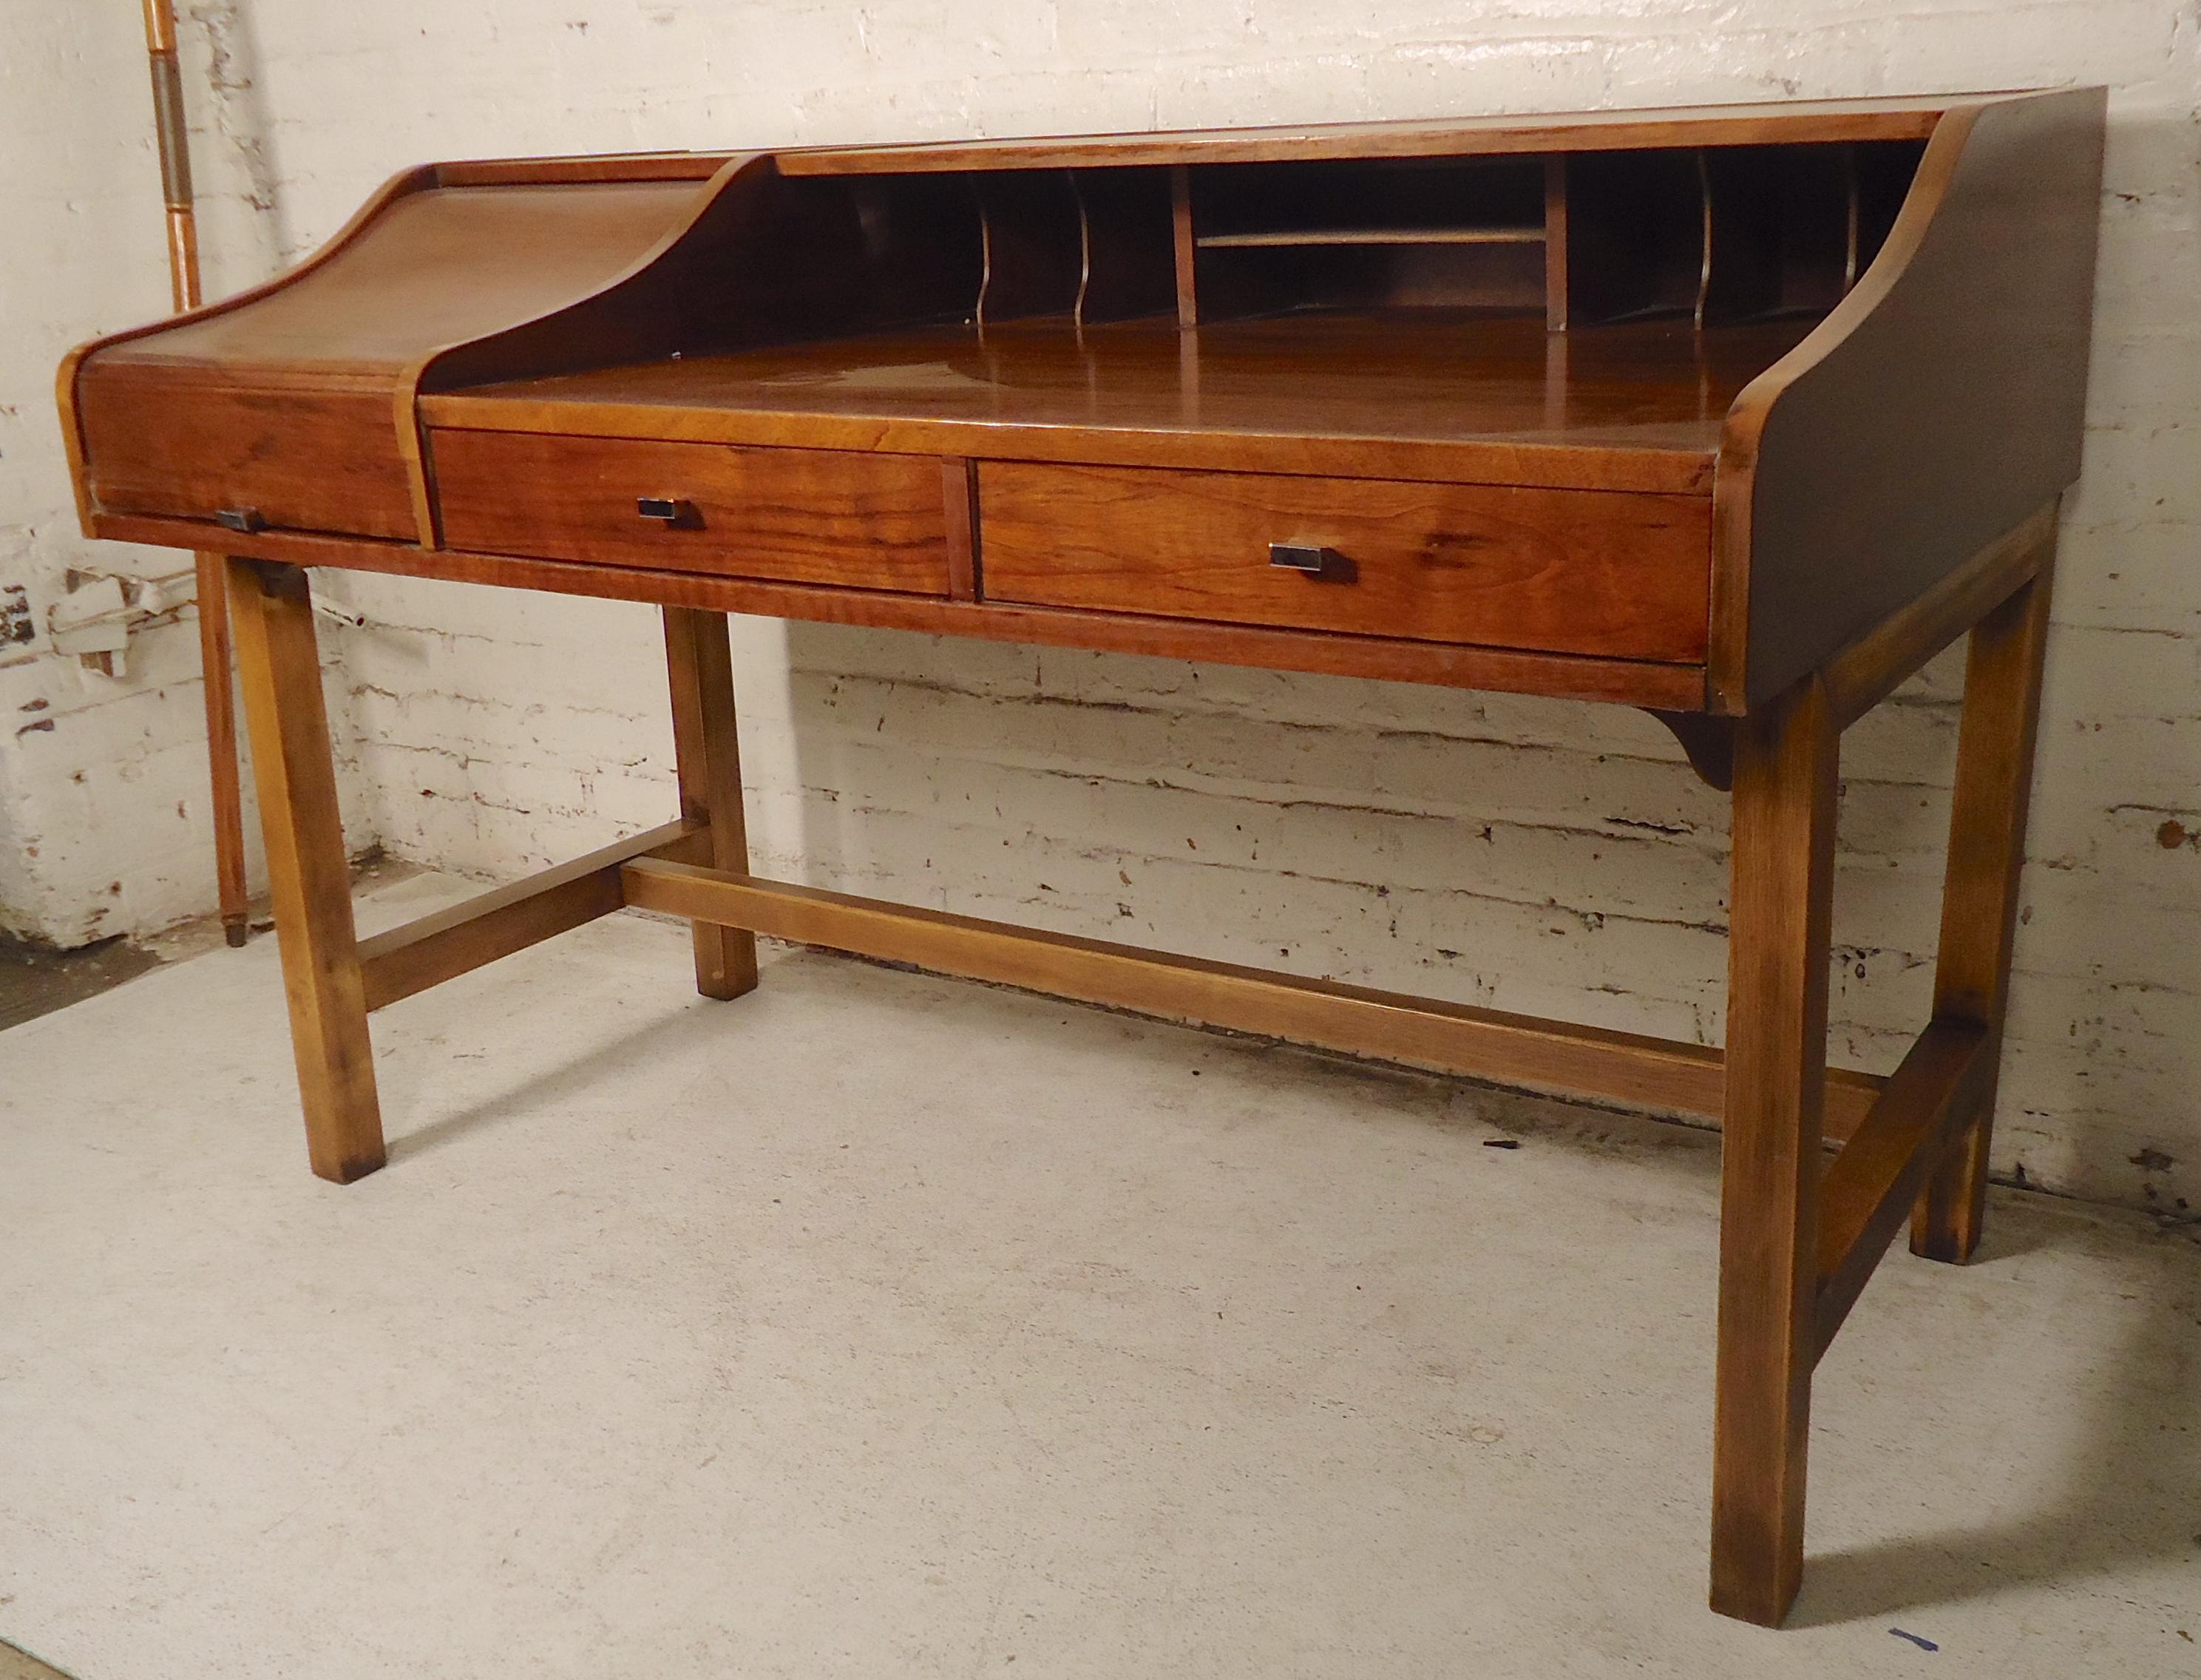 Vintage modern writing desk by Lane Furniture in walnut. Roll top side compartment, two drawers, wide writing surface with cubbies.
(Please confirm item location - NY or NJ - with dealer).
  